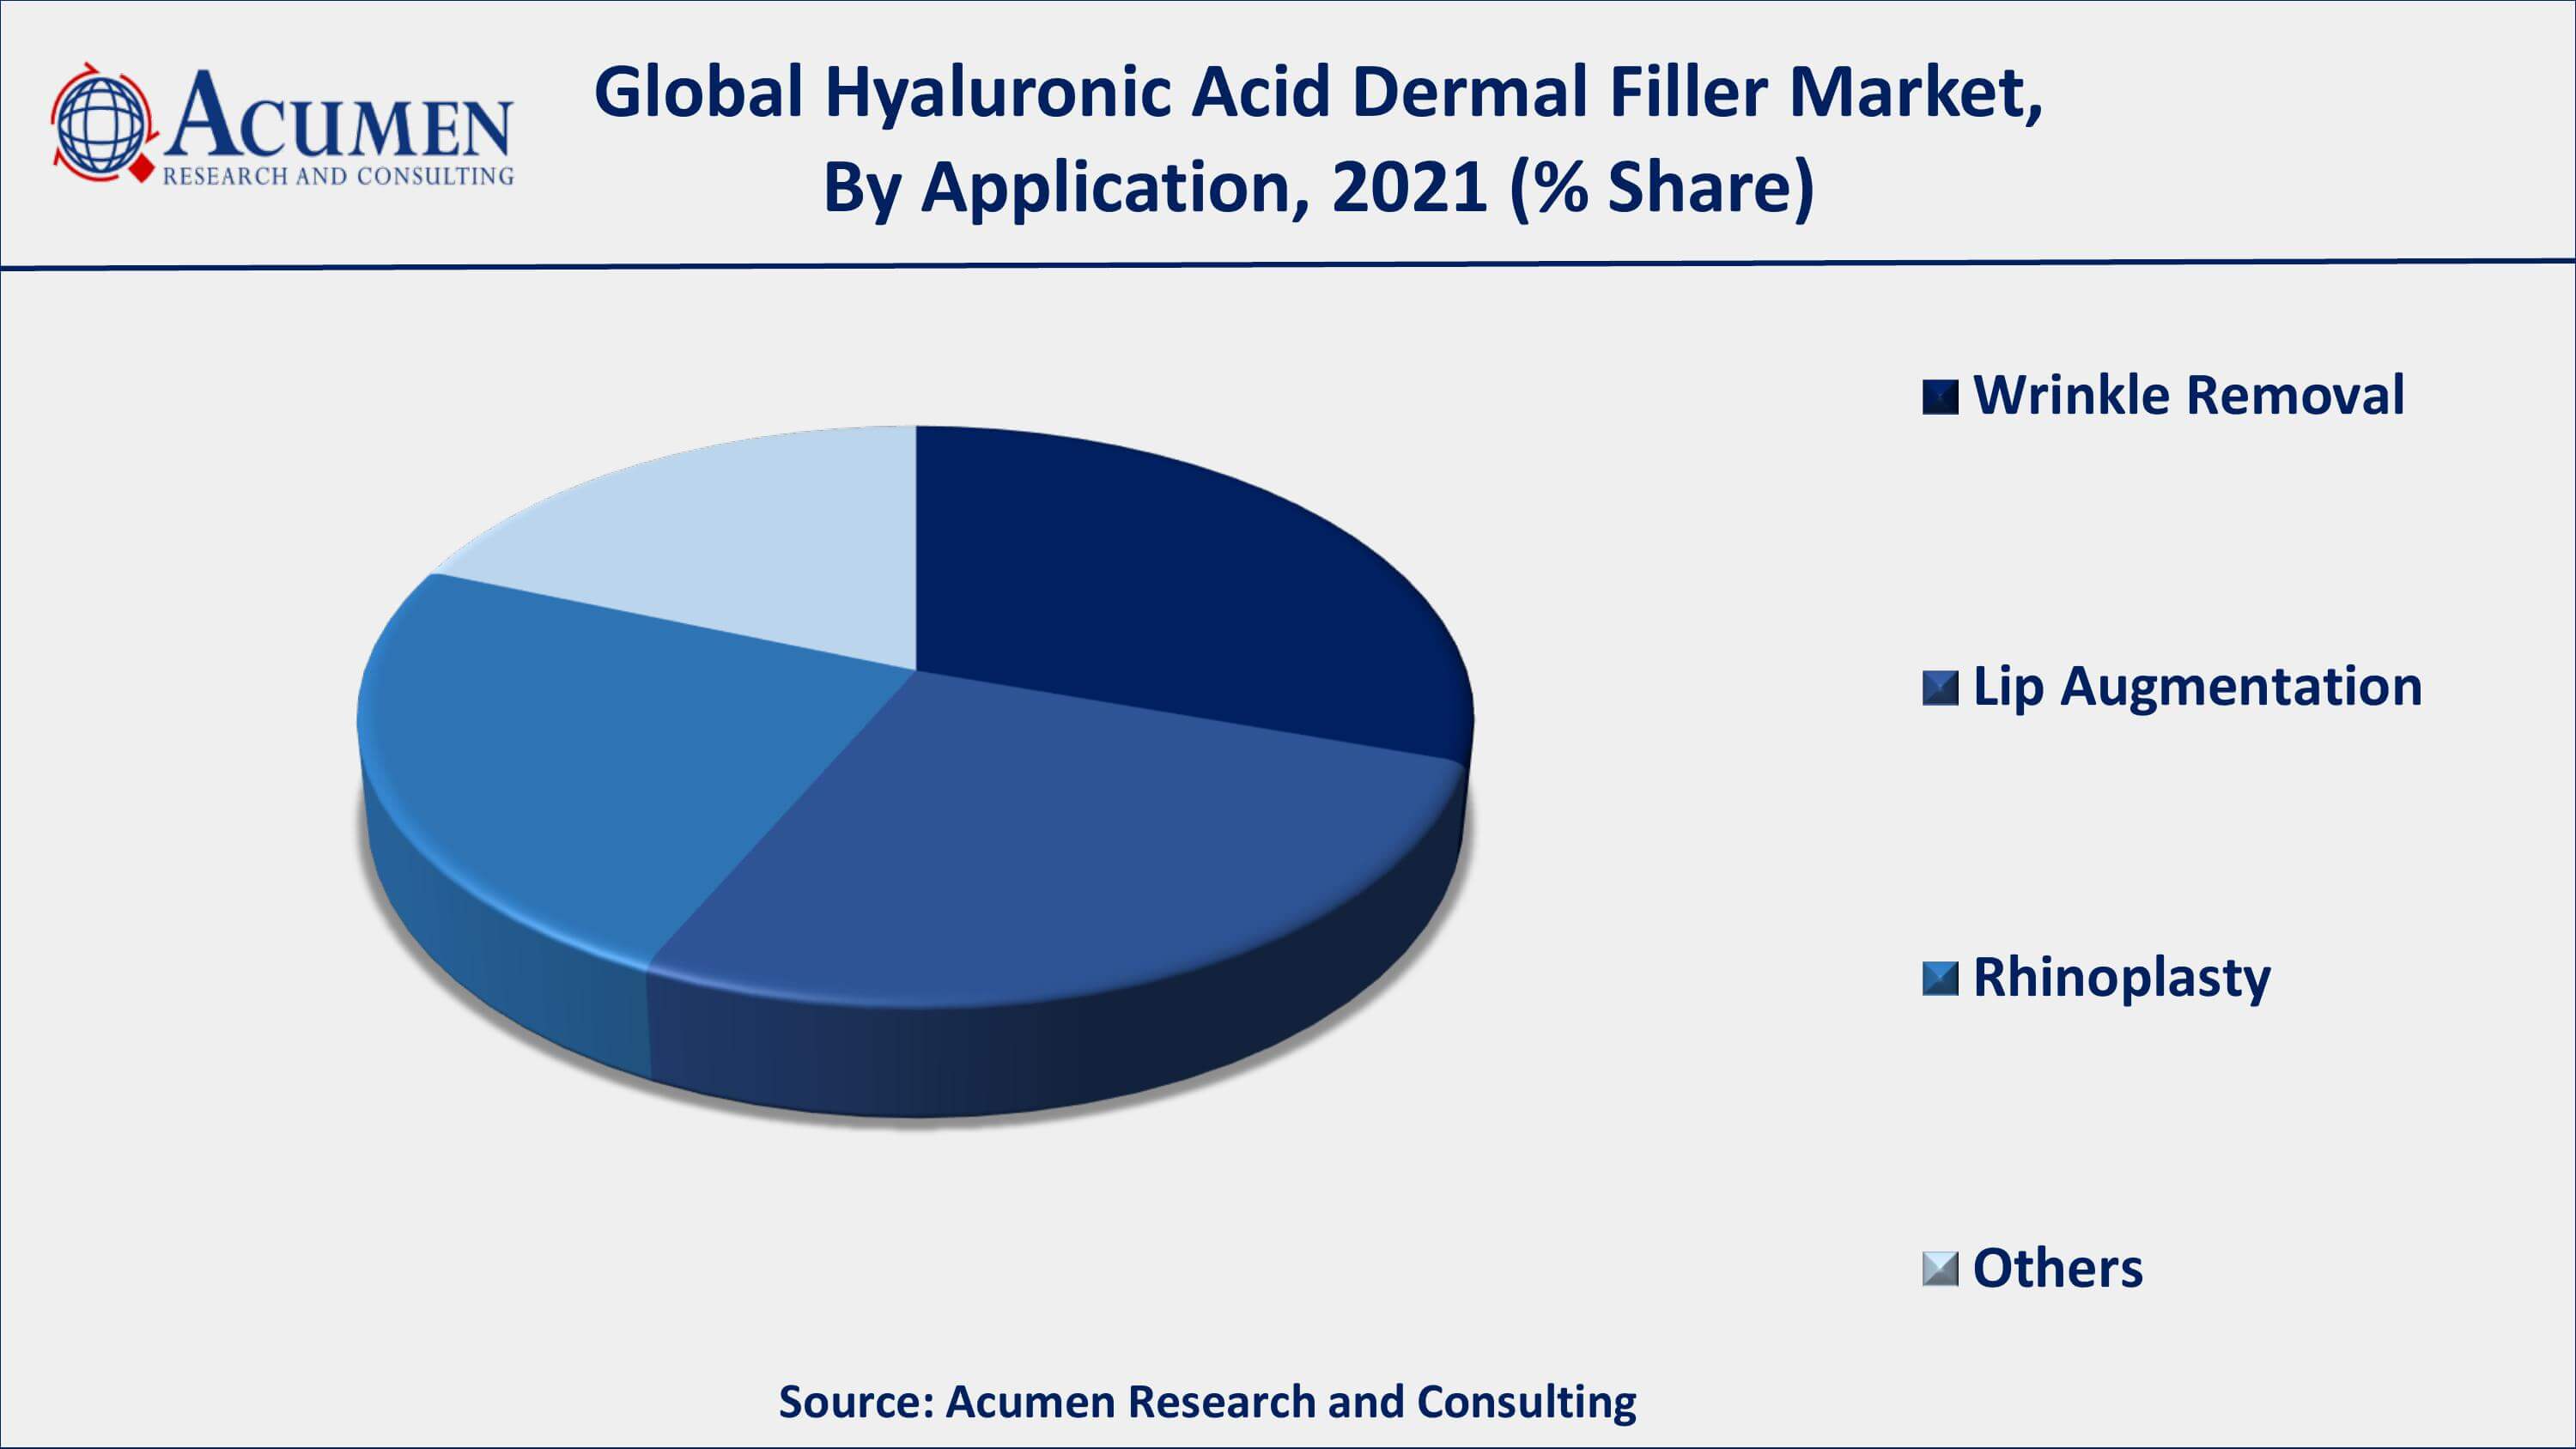 Among application, wrinkle removal occupied more than 30% of the market share from 2022 to 2030